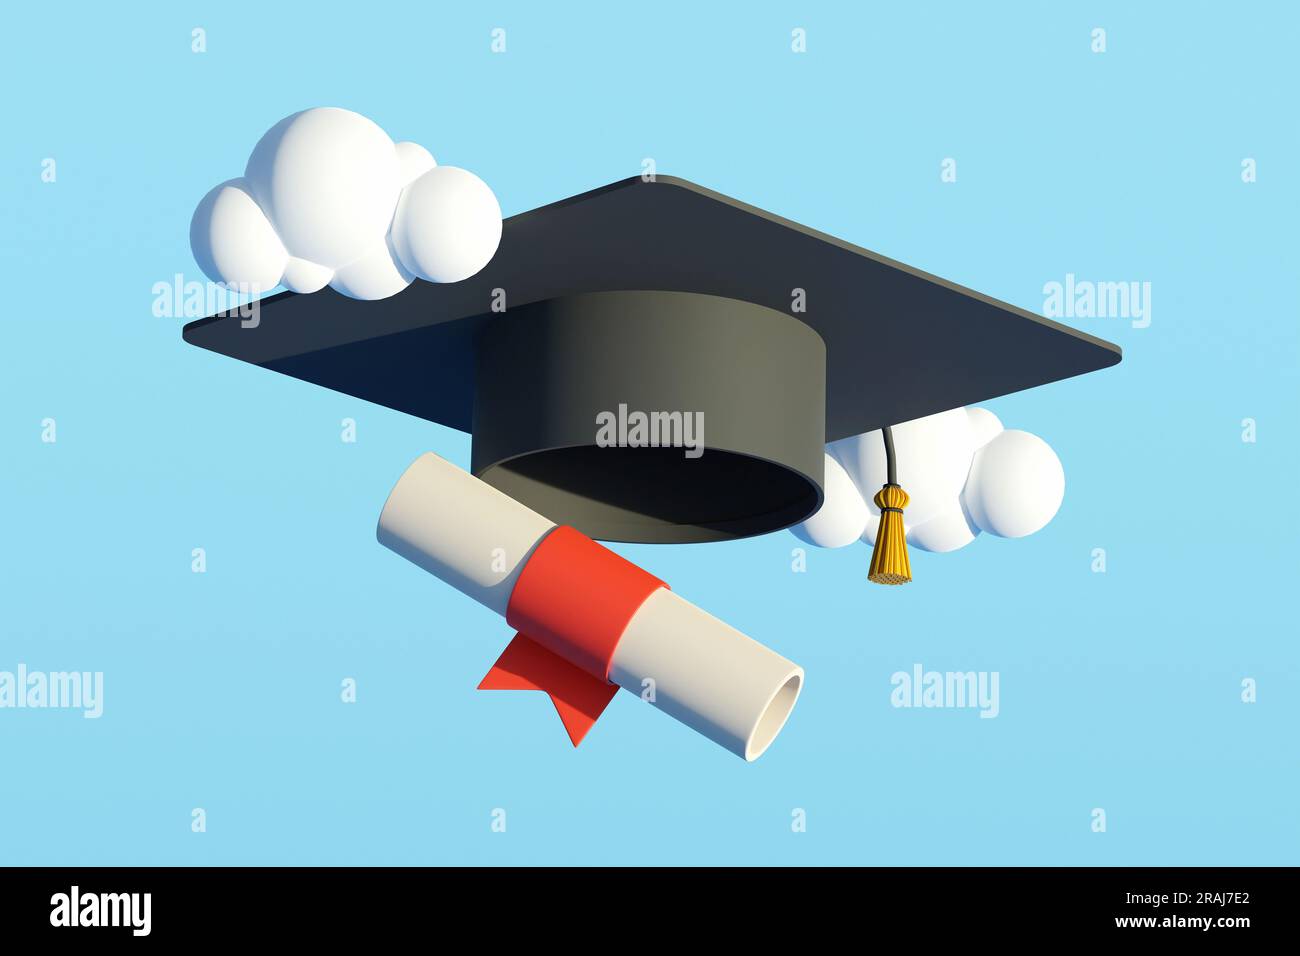 Creative 3d collage image of mortarboard graduation hat scroll diploma paper flying clouds isolated on blue background Stock Photo